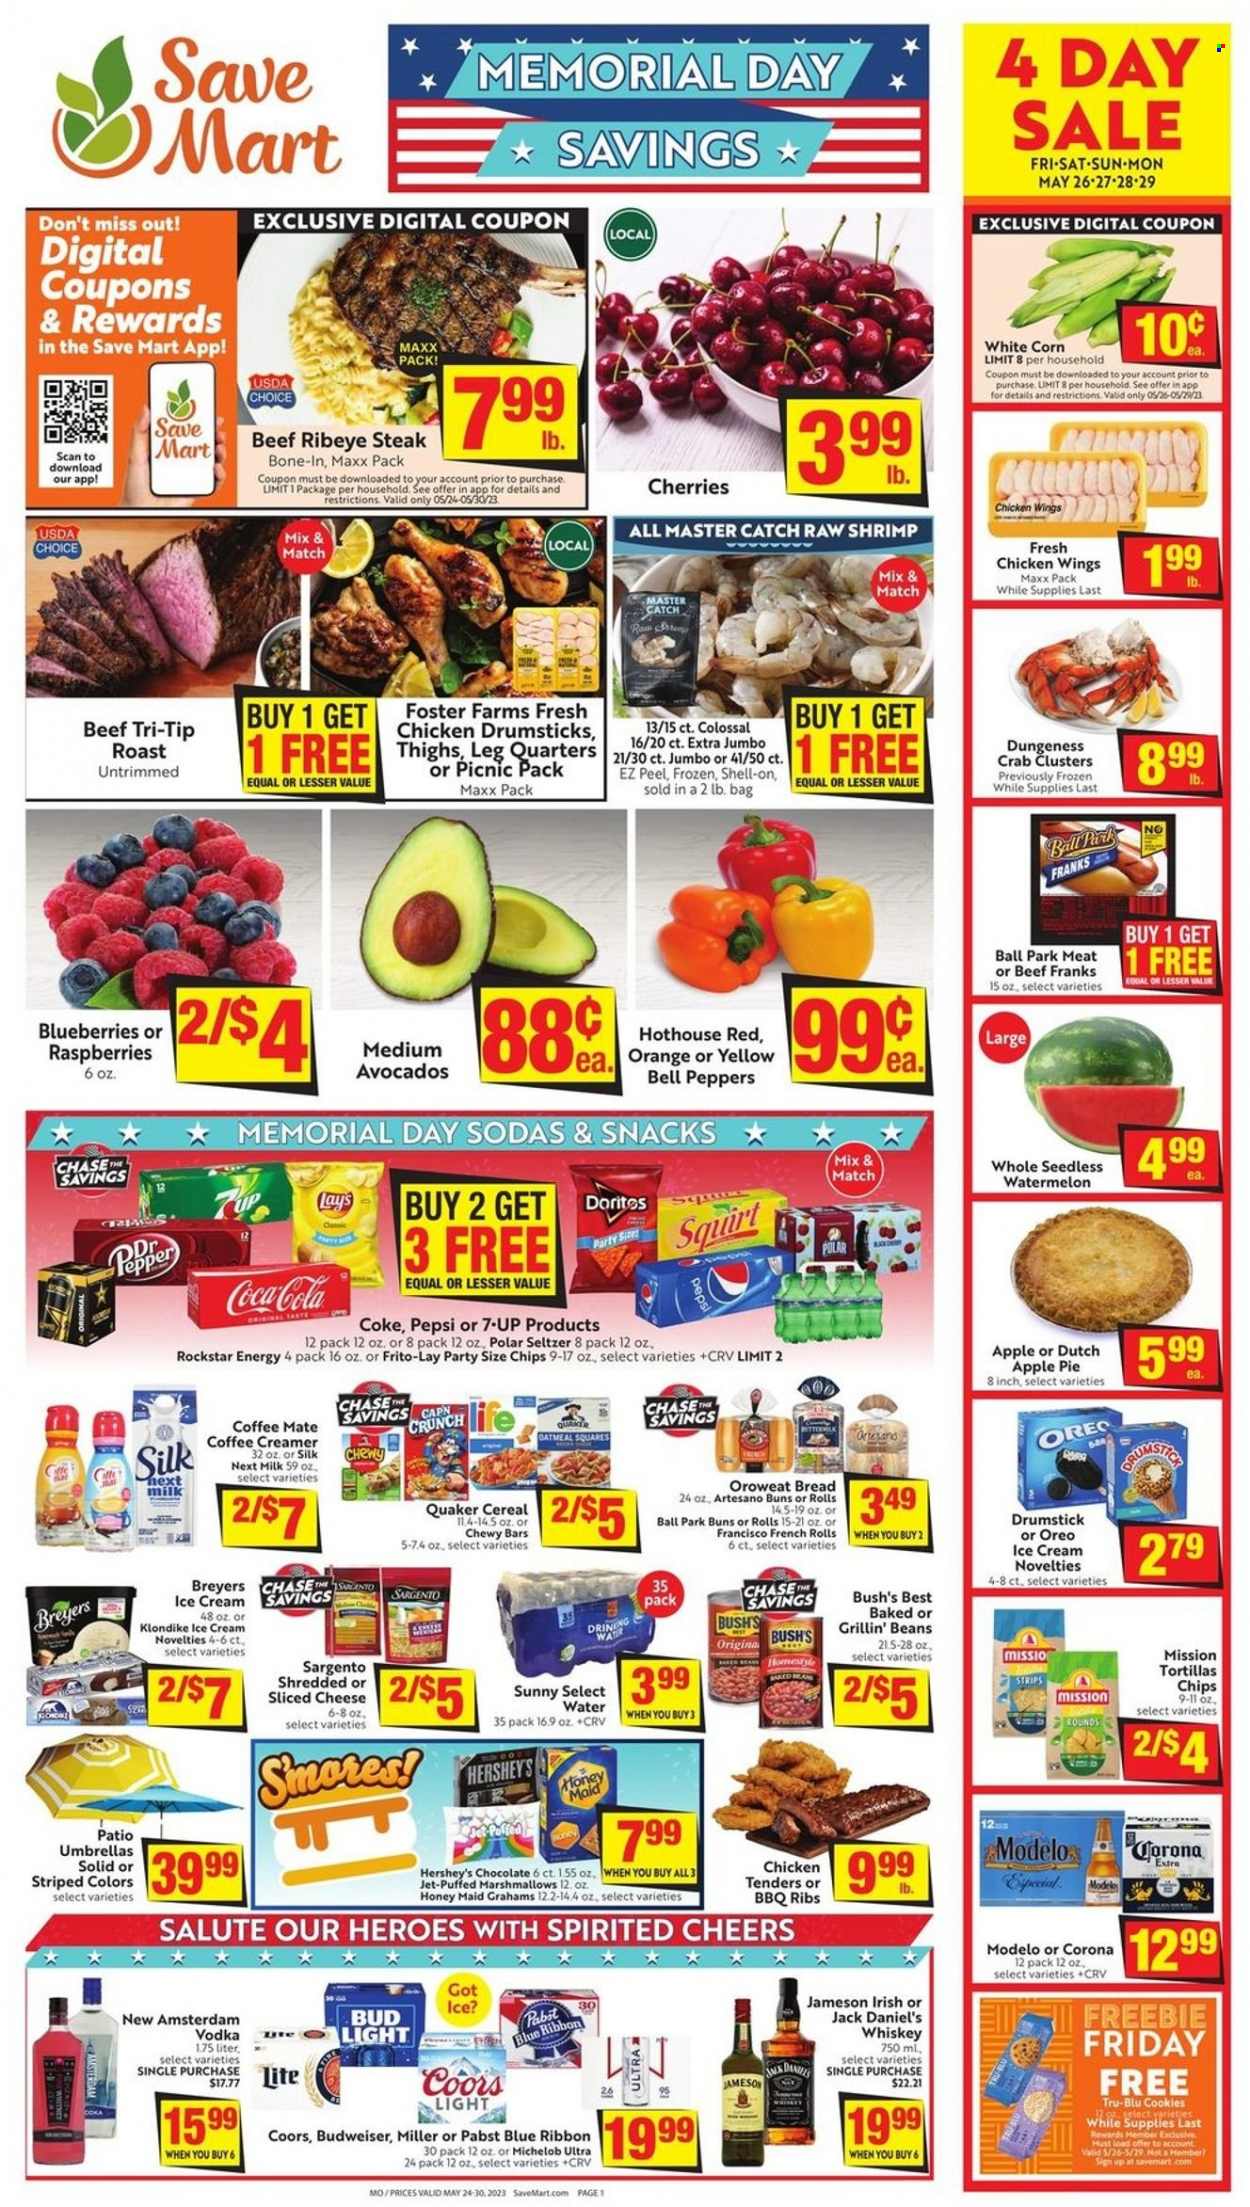 thumbnail - Save Mart Flyer - 05/24/2023 - 05/30/2023 - Sales products - bread, tortillas, pie, buns, apple pie, bell peppers, corn, peppers, red peppers, avocado, blueberries, raspberries, watermelon, chicken tenders, chicken wings, chicken drumsticks, chicken, beef meat, beef steak, steak, ribeye steak, ribs, roast, crab, shrimps, crab clusters, Jack Daniel's, Quaker, ready meal, snack, frankfurters, shredded cheese, sliced cheese, Sargento, Oreo, Coffee-Mate, milk, Silk, creamer, ice cream, Hershey's, strips, cookies, marshmallows, Doritos, Lay’s, Frito-Lay, salty snack, baked beans, cereals, Honey Maid, Coca-Cola, Pepsi, soft drink, 7UP, Rockstar, Coke, seltzer water, water, vodka, whiskey, Jameson, whisky, beer, Bud Light, Corona Extra, Modelo, Pabst Blue Ribbon, Pabst, Jet, Budweiser, Coors, Michelob. Page 1.